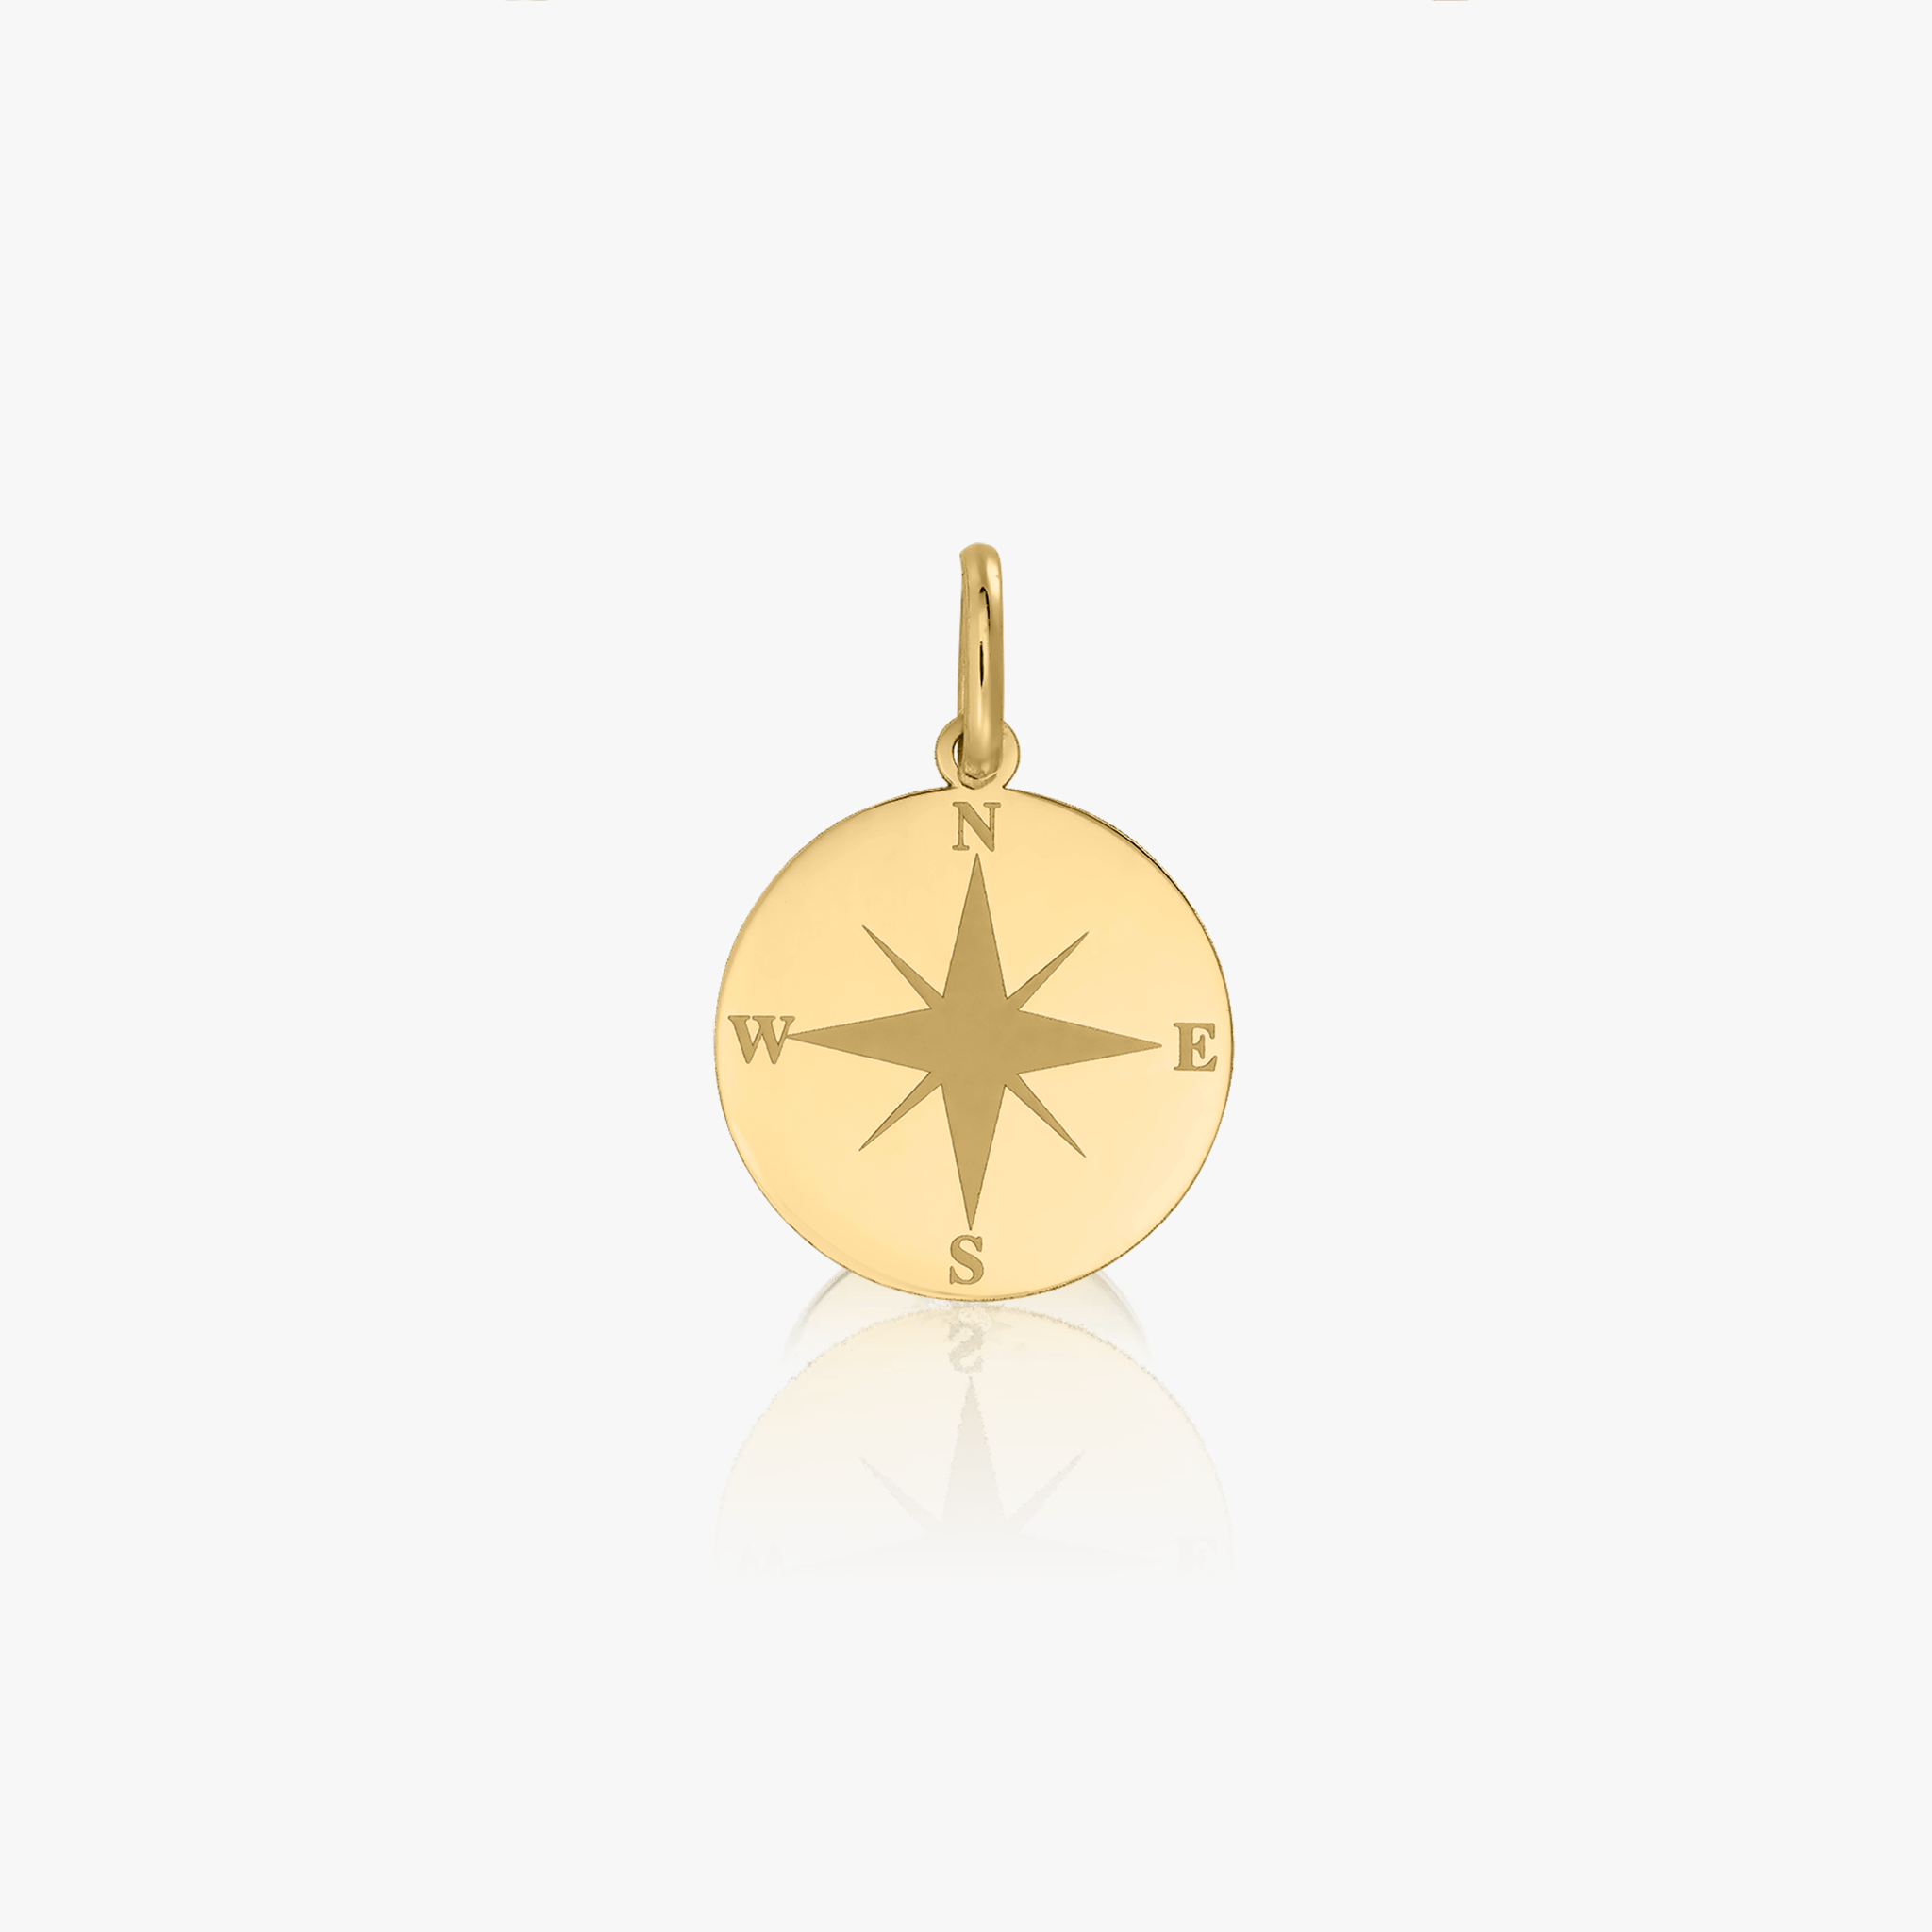 Find my Way gold pendant